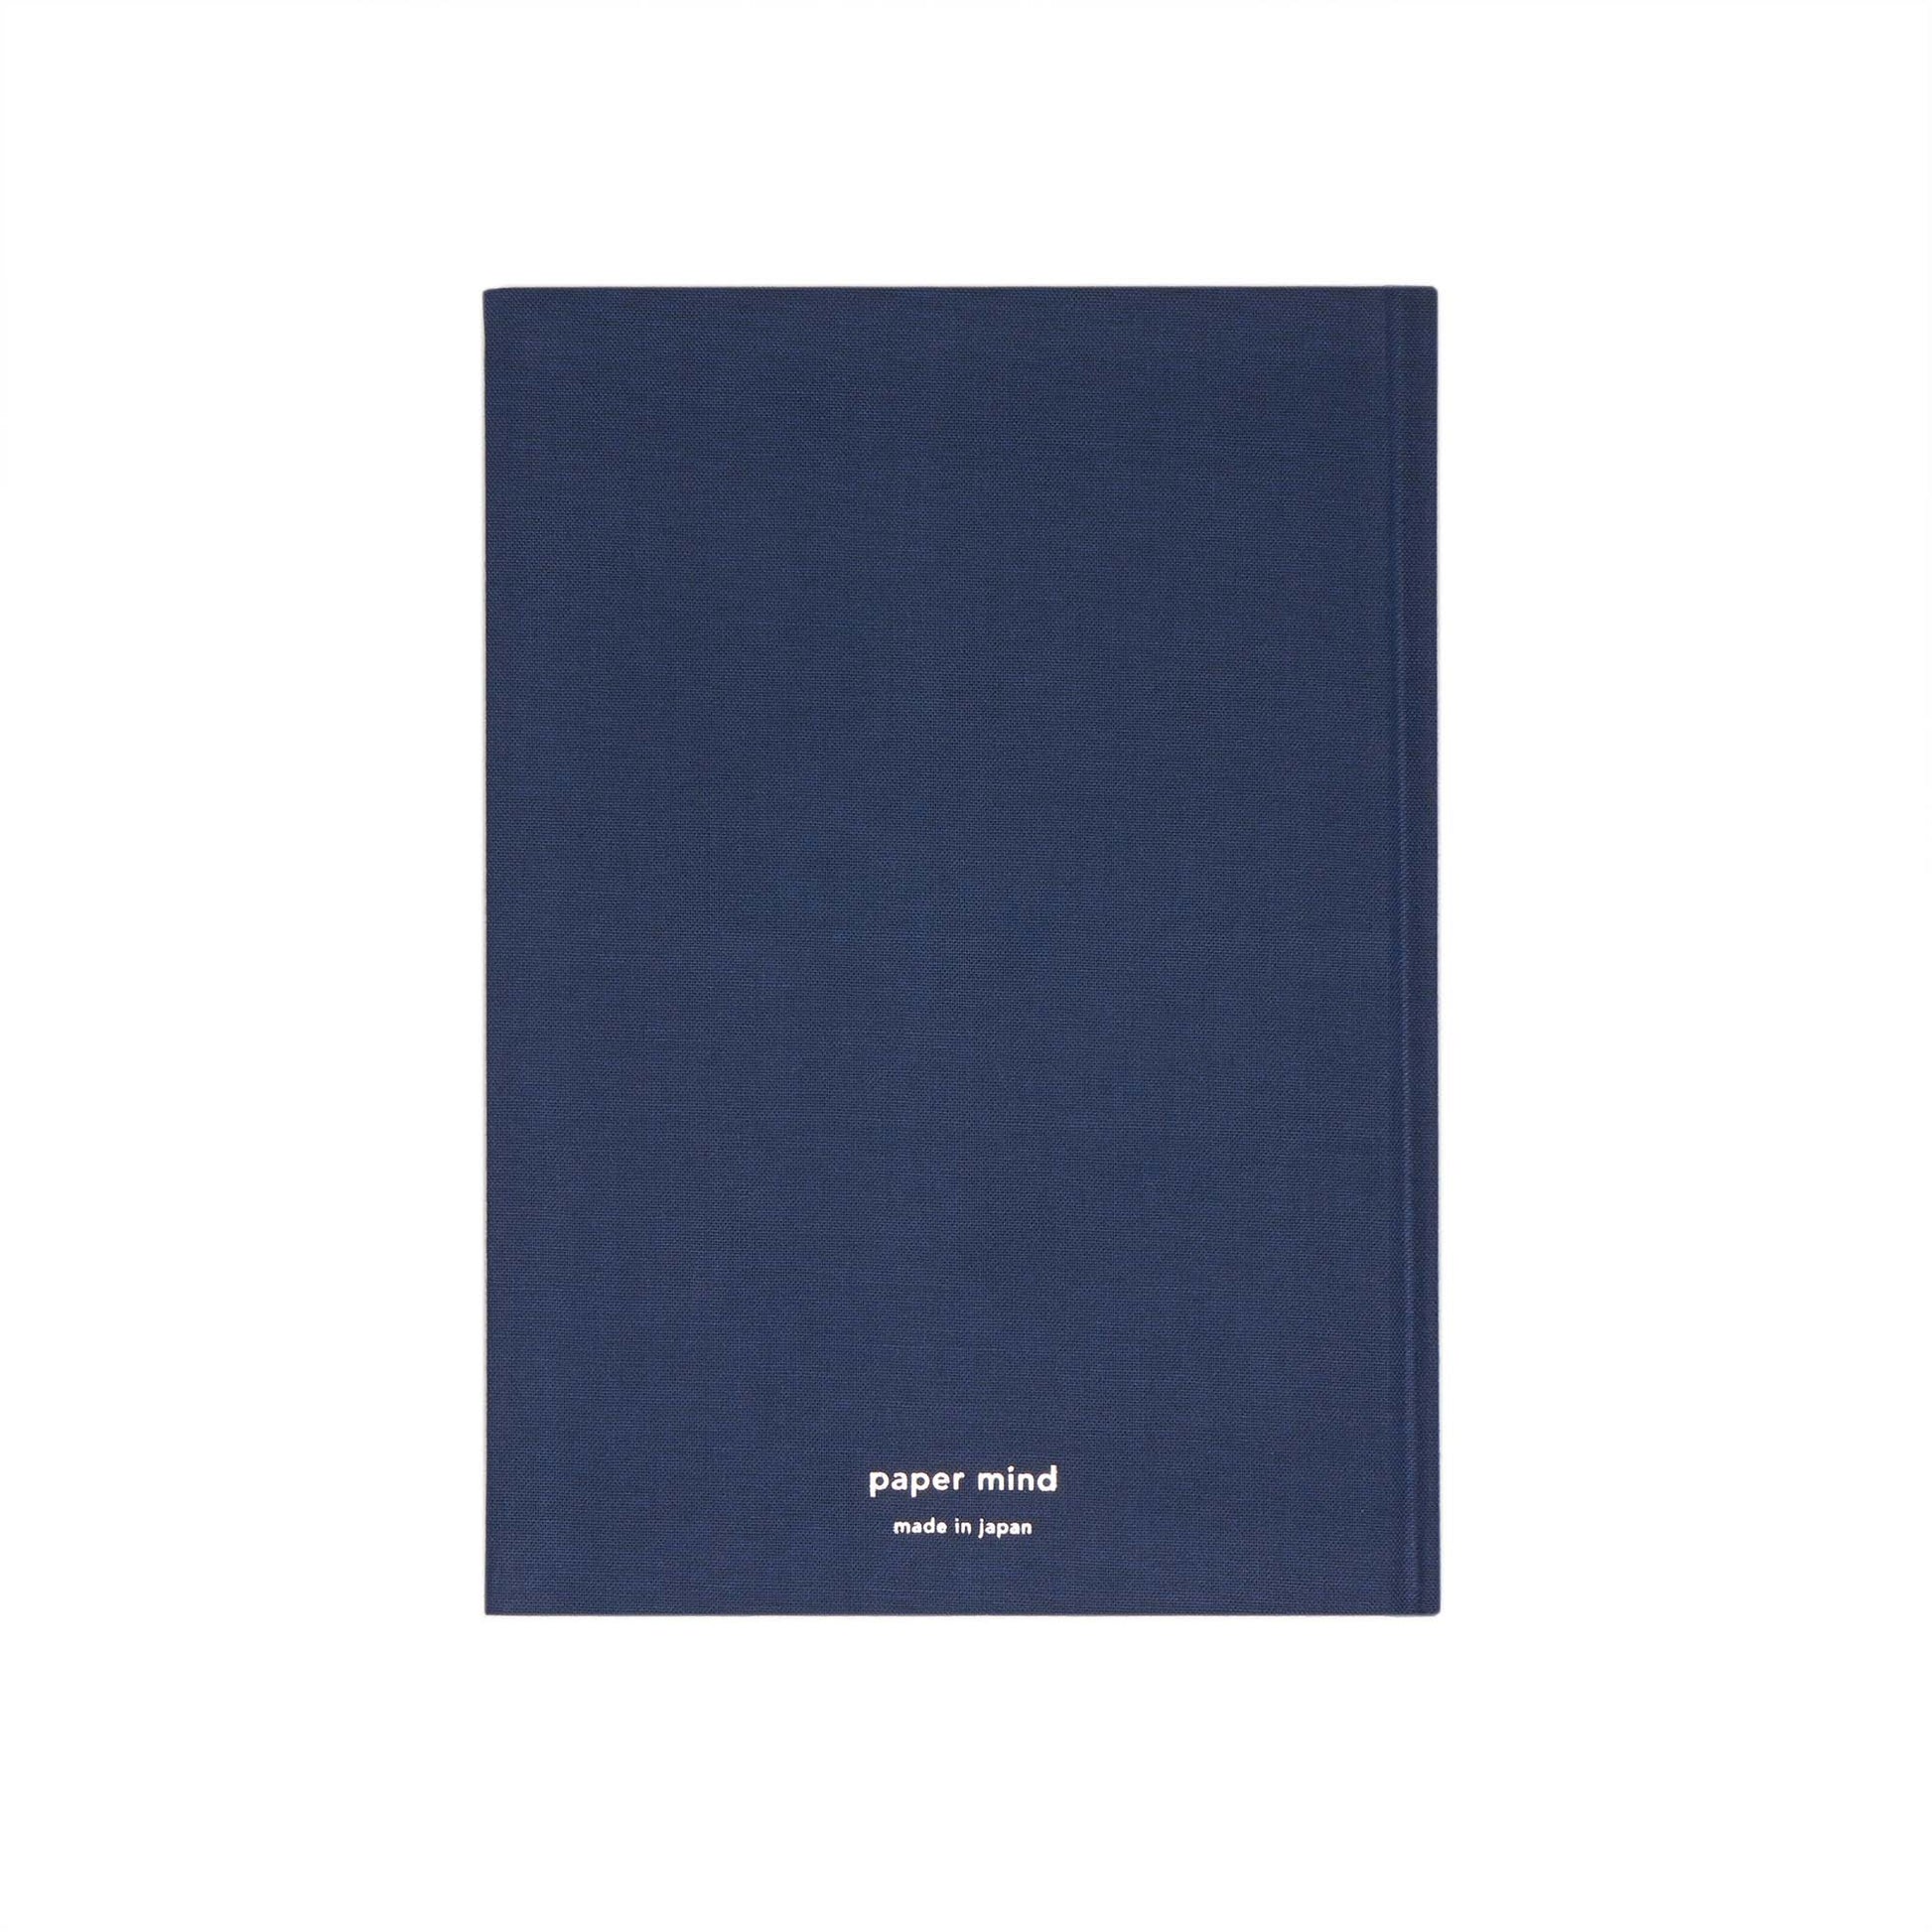 The Paper Mind Passepied Cream Hardcover Notebook. Fountain pen friendly Journal. Navy Blue Japanese Linen Cover. Back cover shown with The Paper Mind silver foil logo